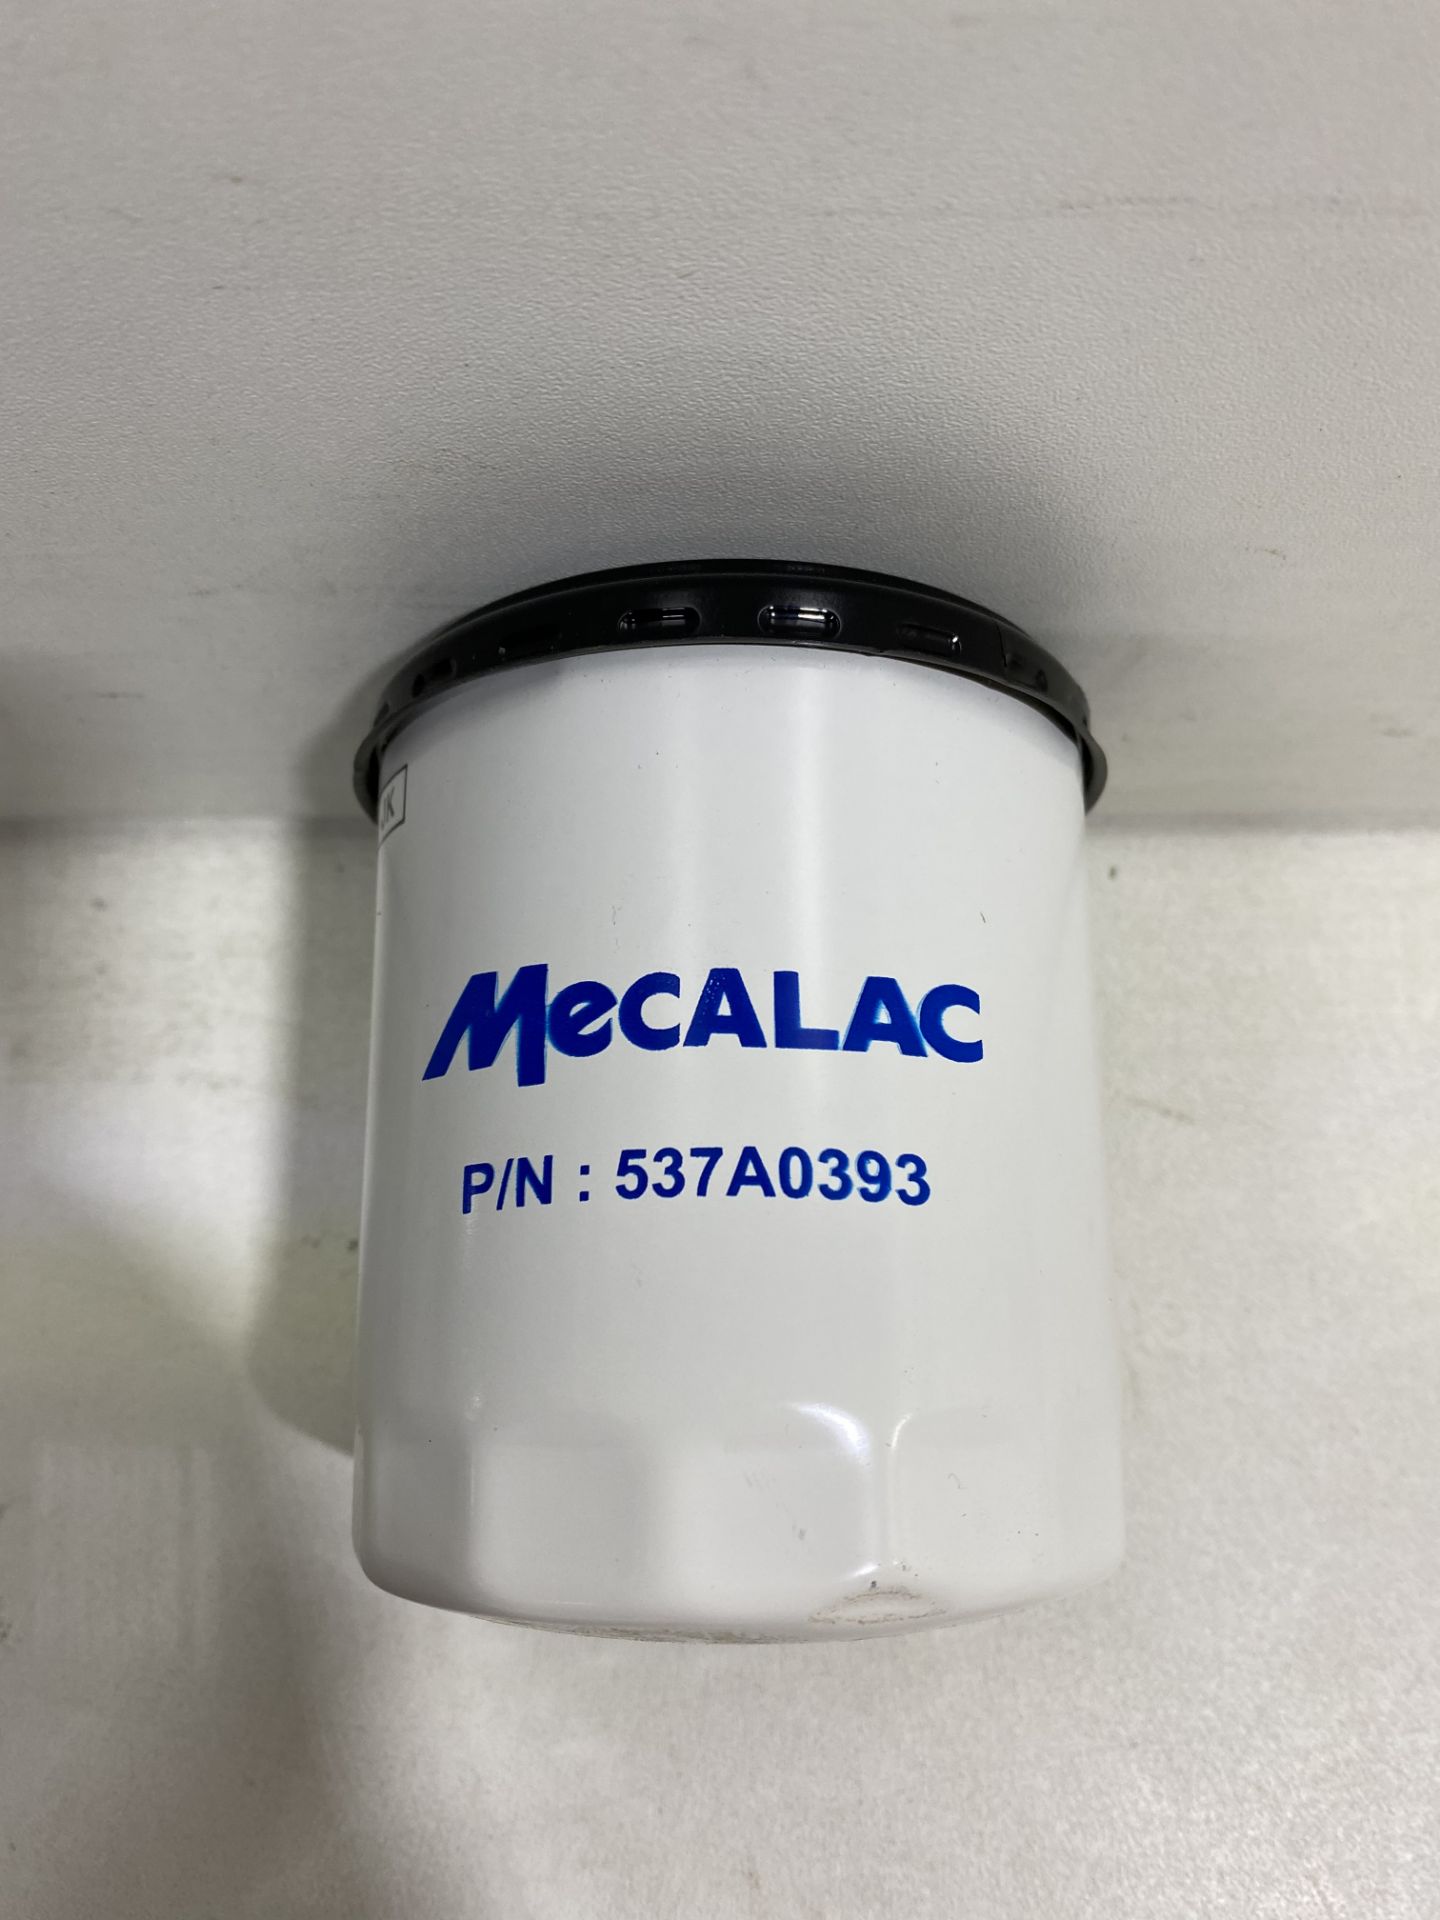 2 x Mecalac Oil Filters - Image 2 of 3